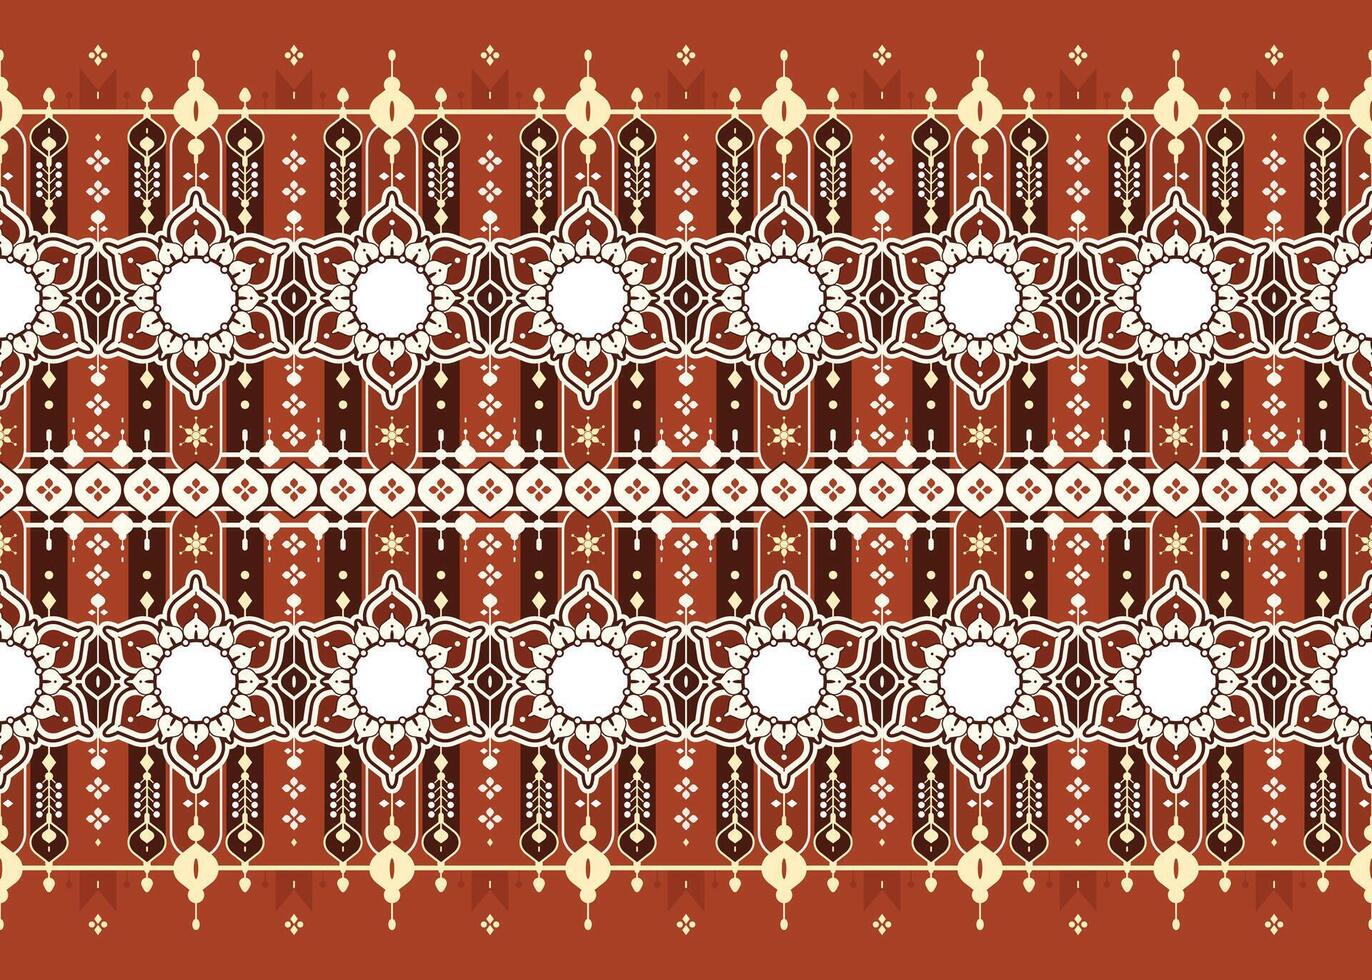 mandalas and geometric shape design on deep red background ethnic fabric seamless pattern for cloth carpet wallpaper wrapping etc. vector